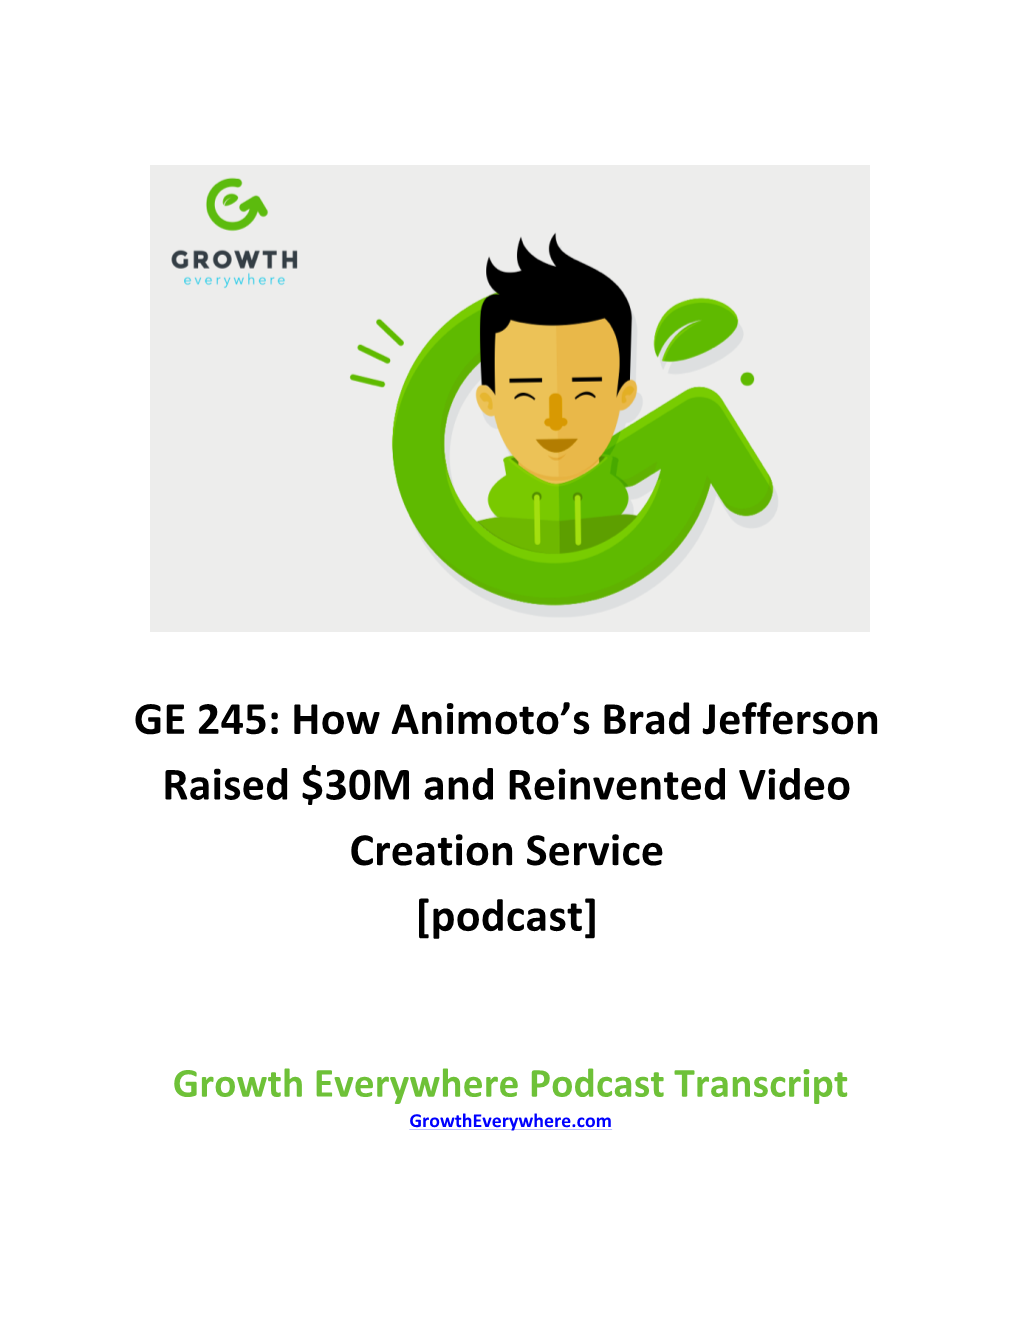 How Animoto's Brad Jefferson Raised $30M and Reinvented Video Creation Service